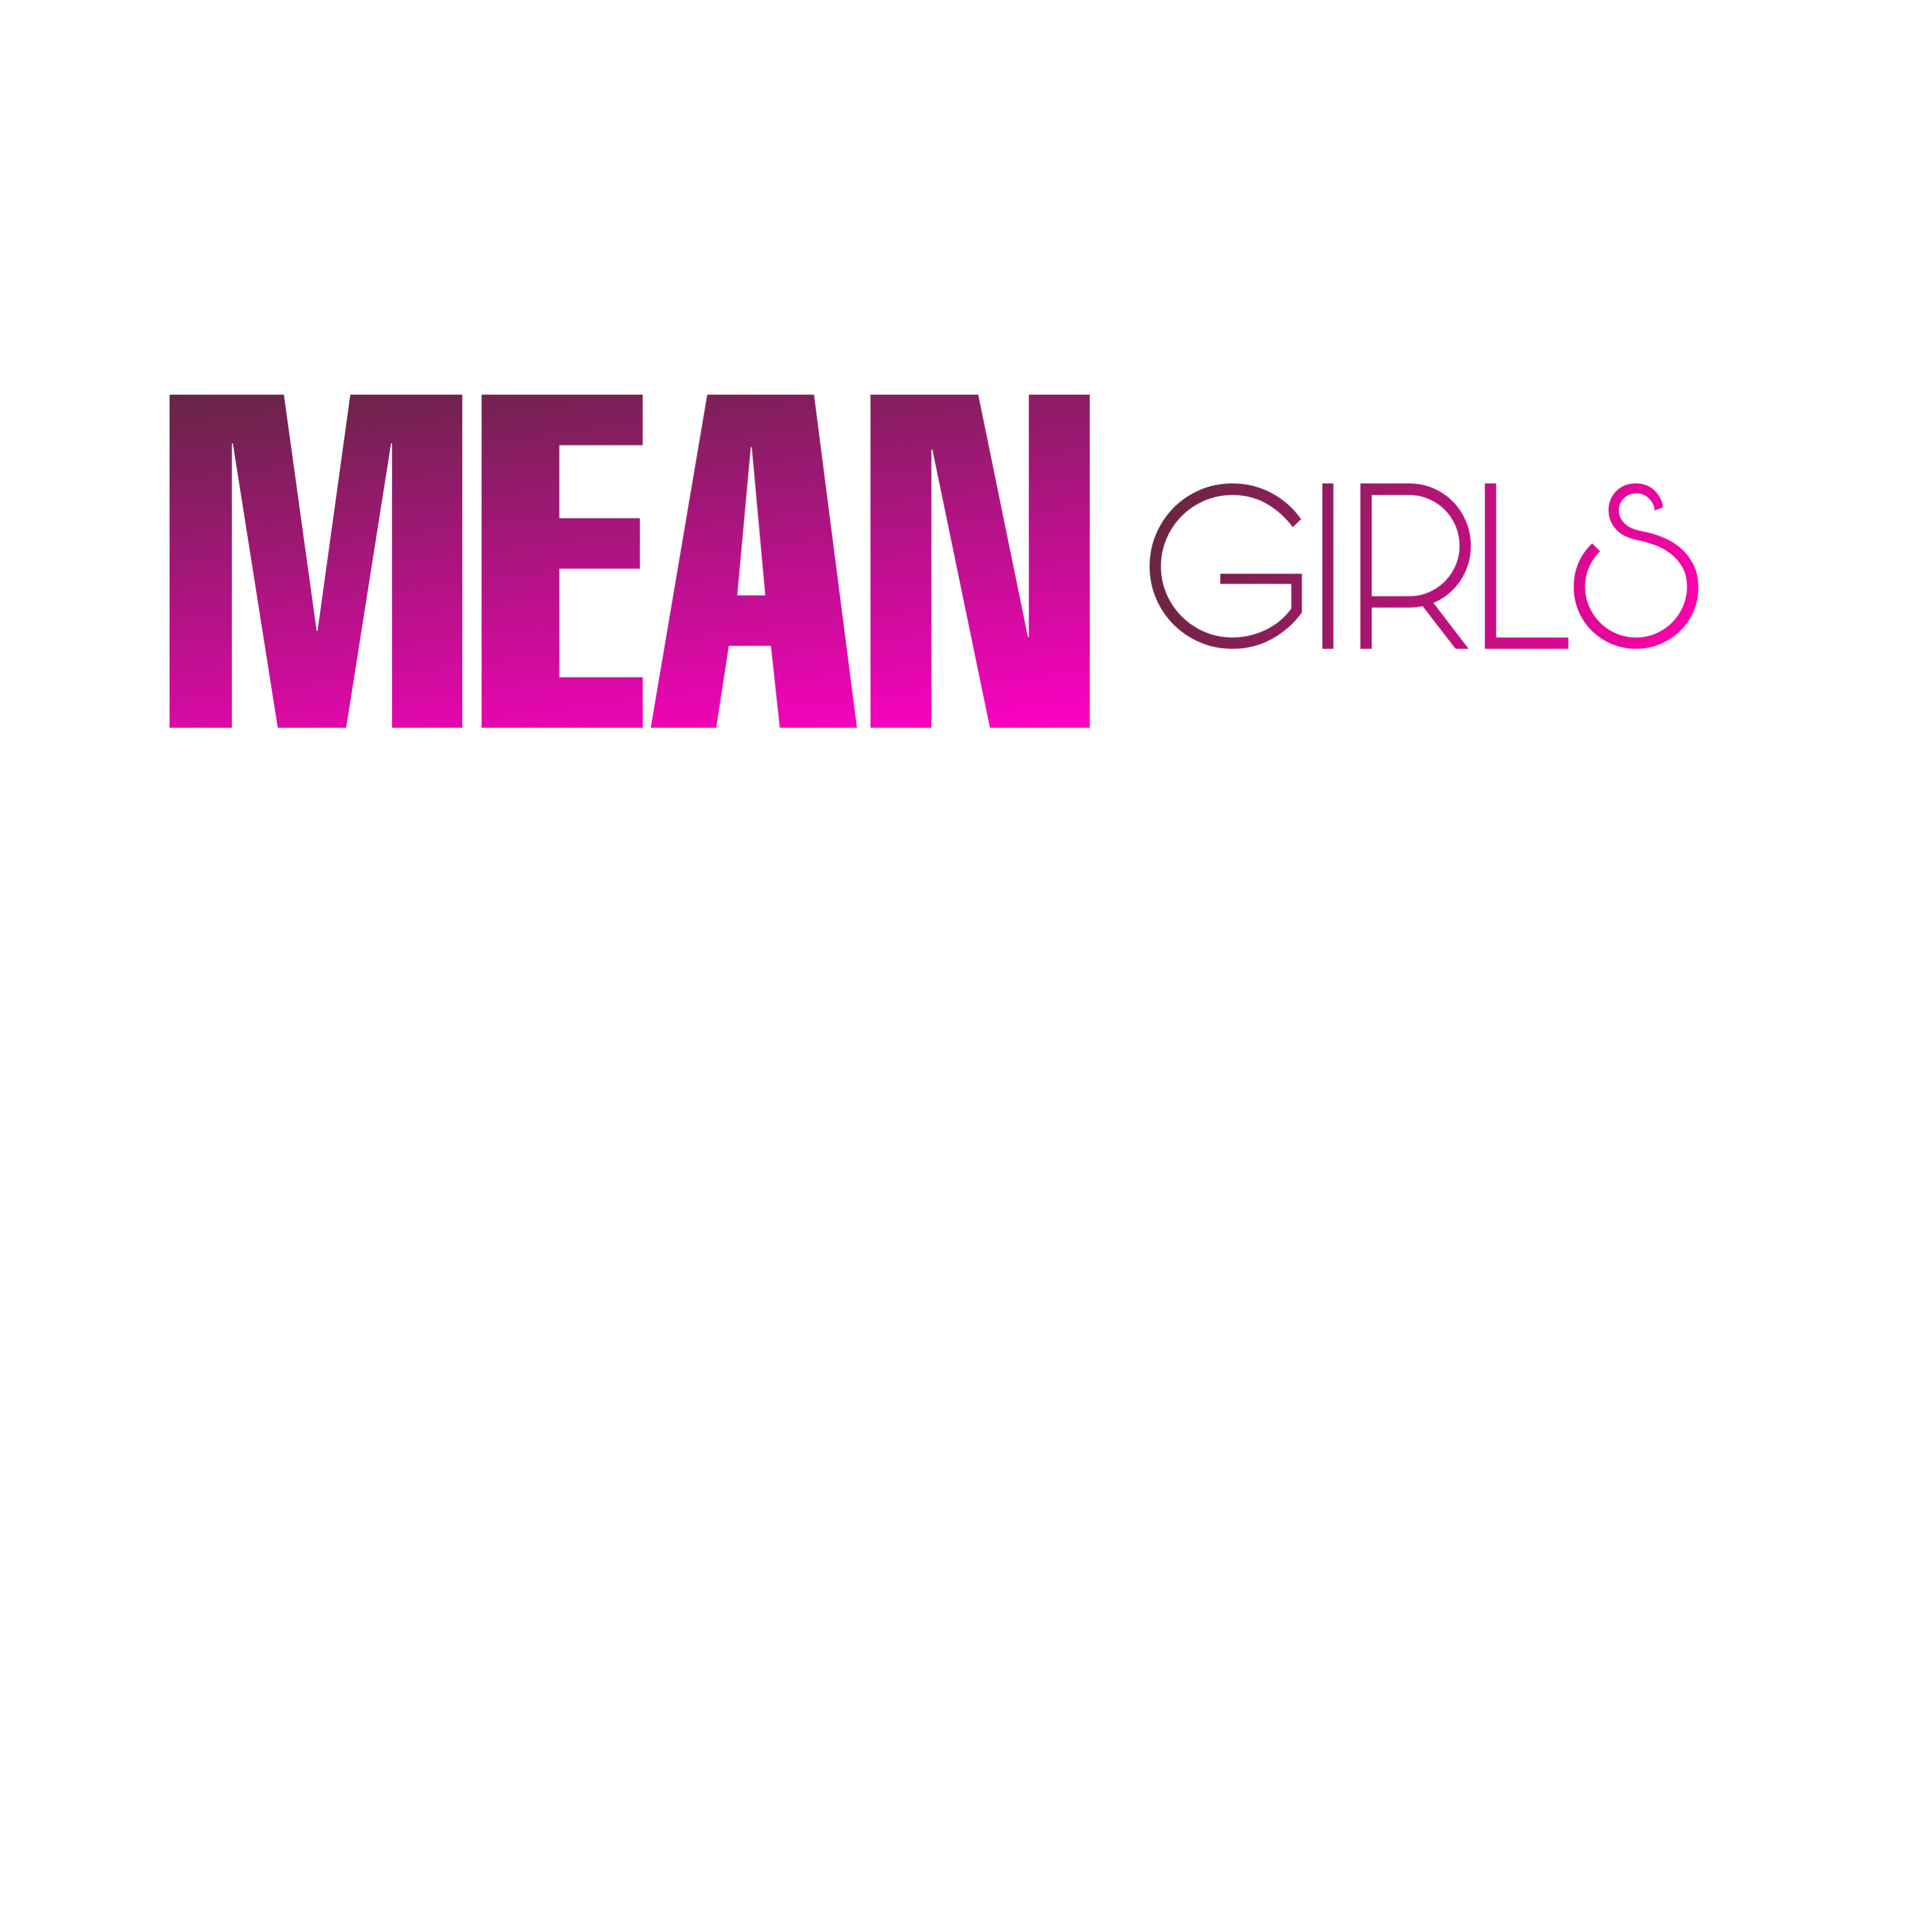 meangirls freetoedit #meangirls sticker by @hollibearxo